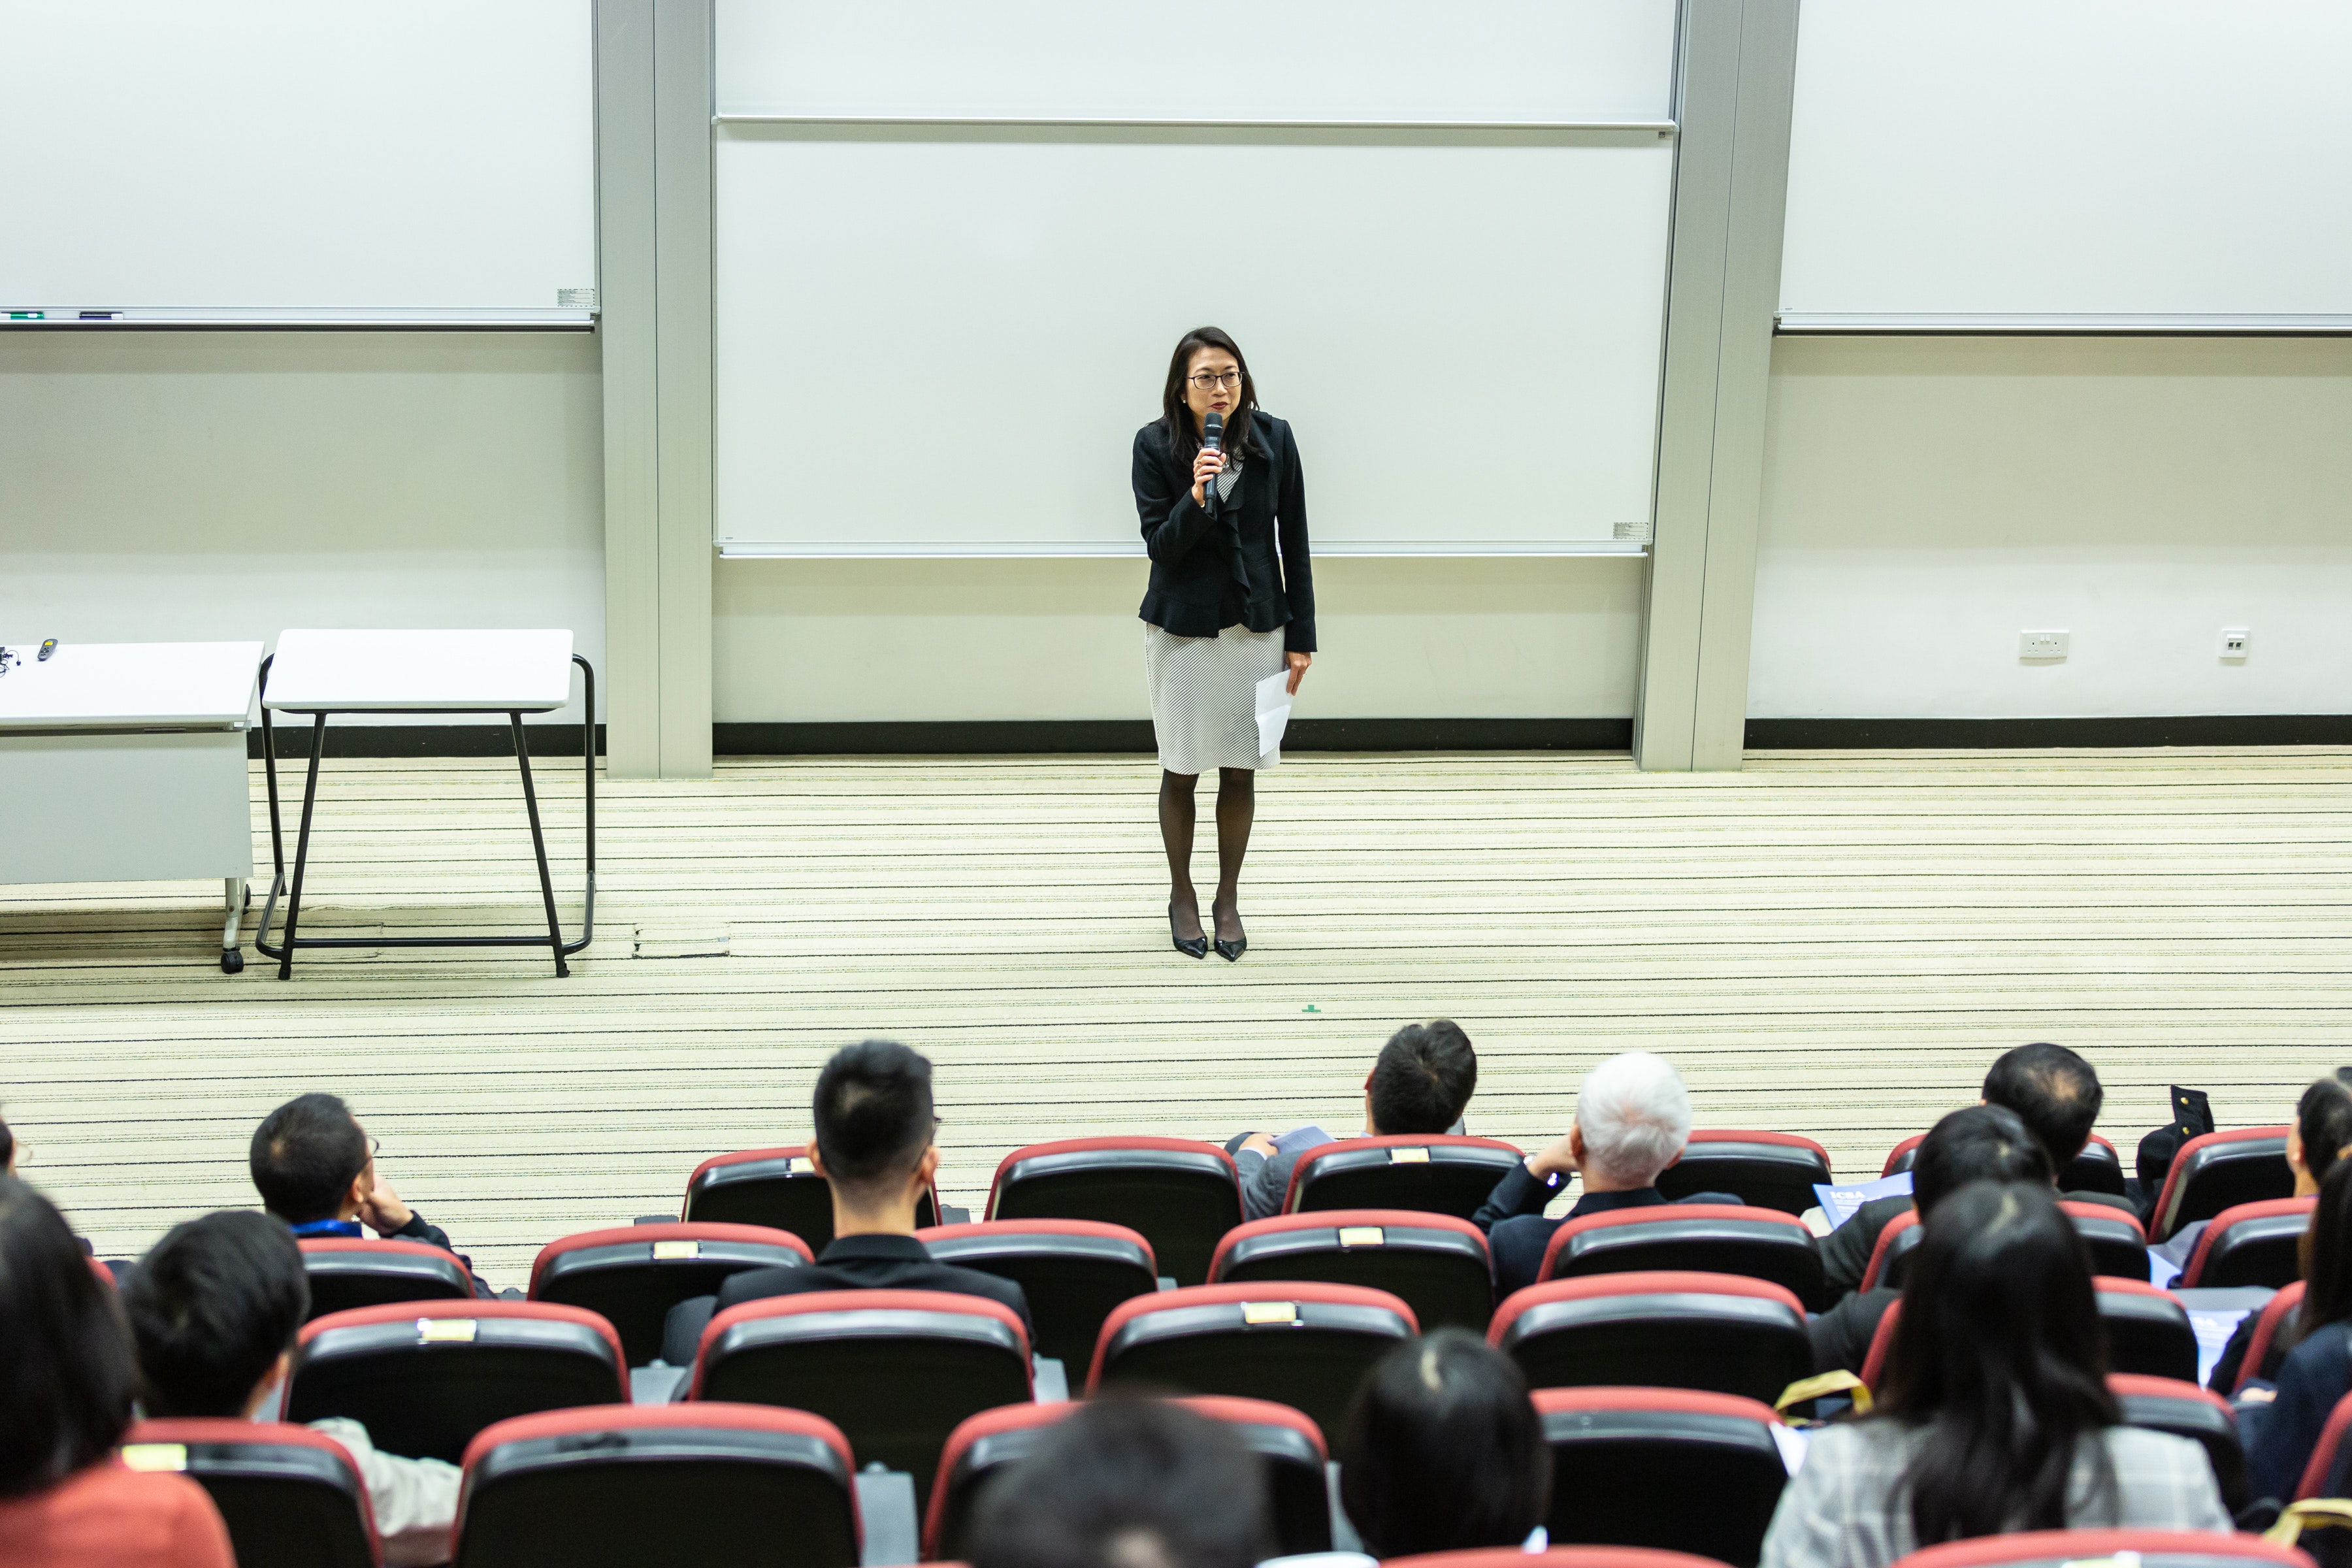 A woman lecturing to a large class